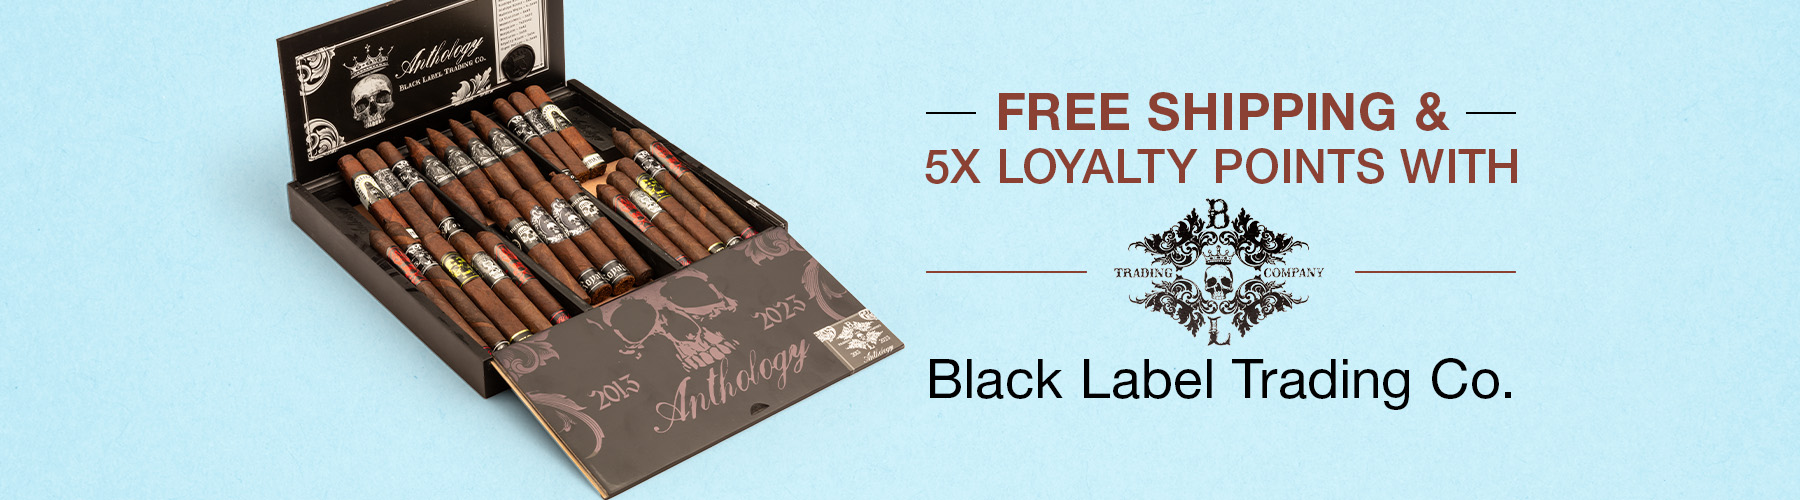 Free Shipping & 5X Loyalty Points with Black Label Trading Co.